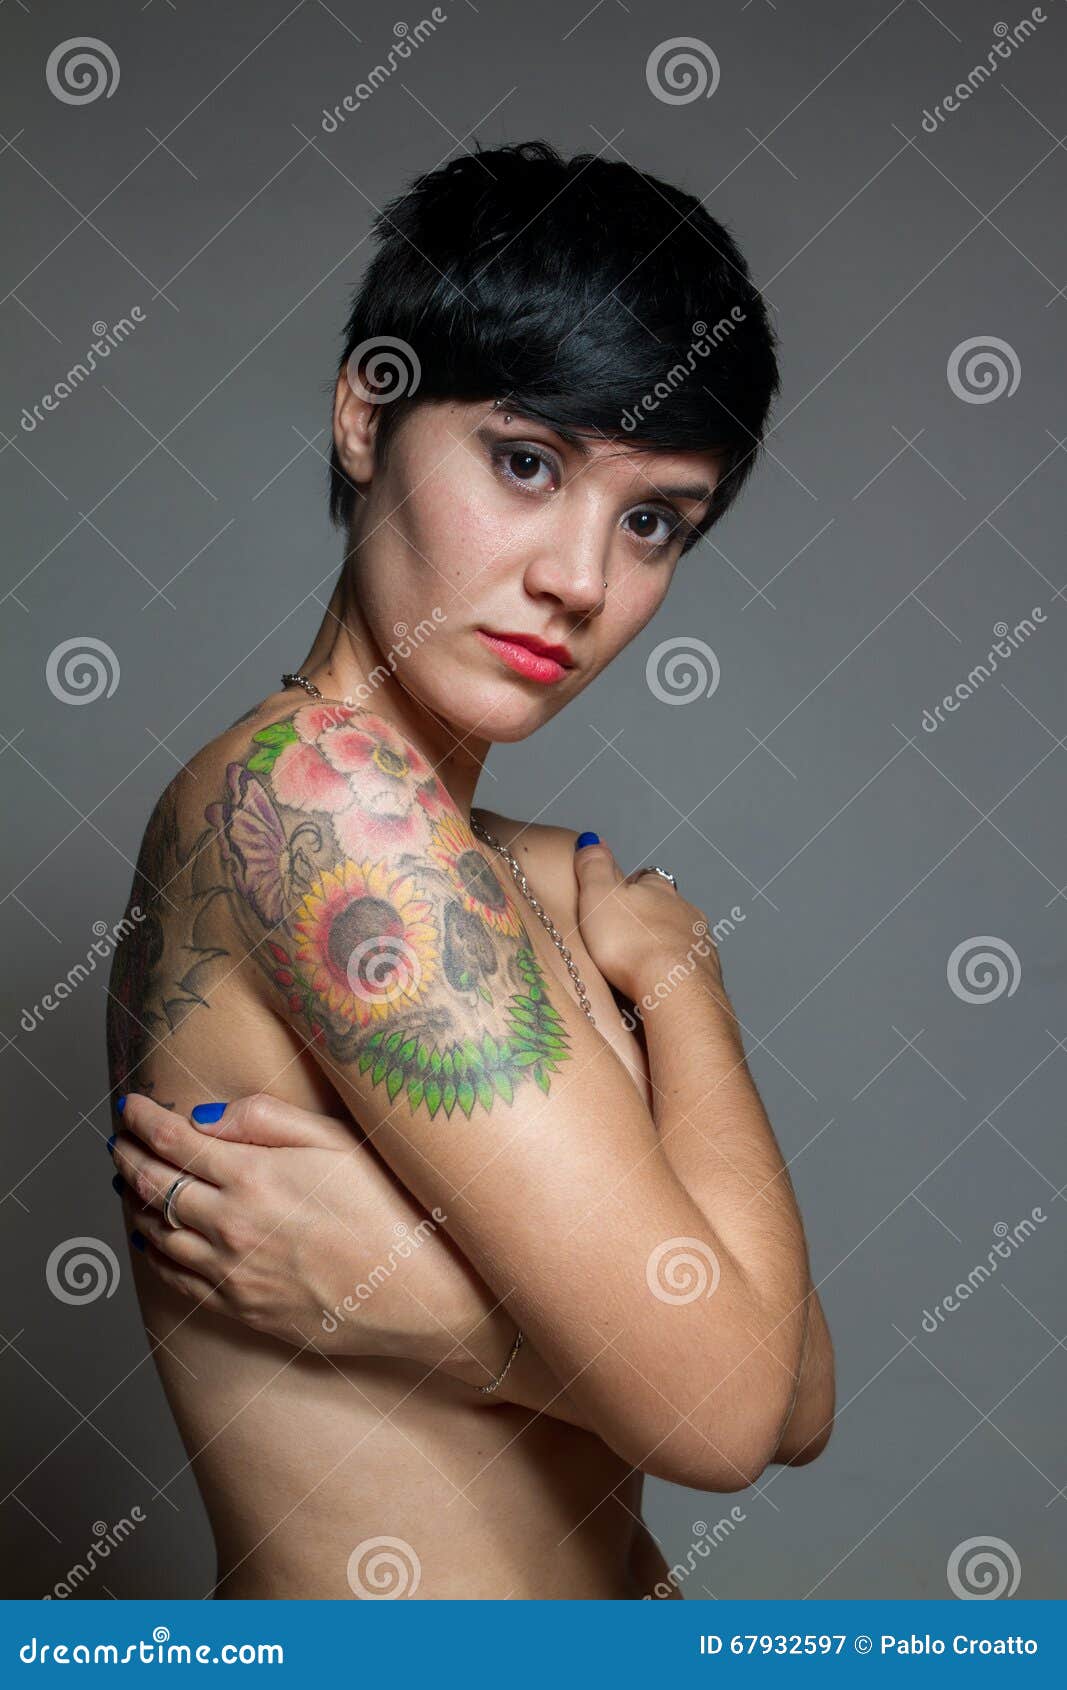 Naked women with short hair